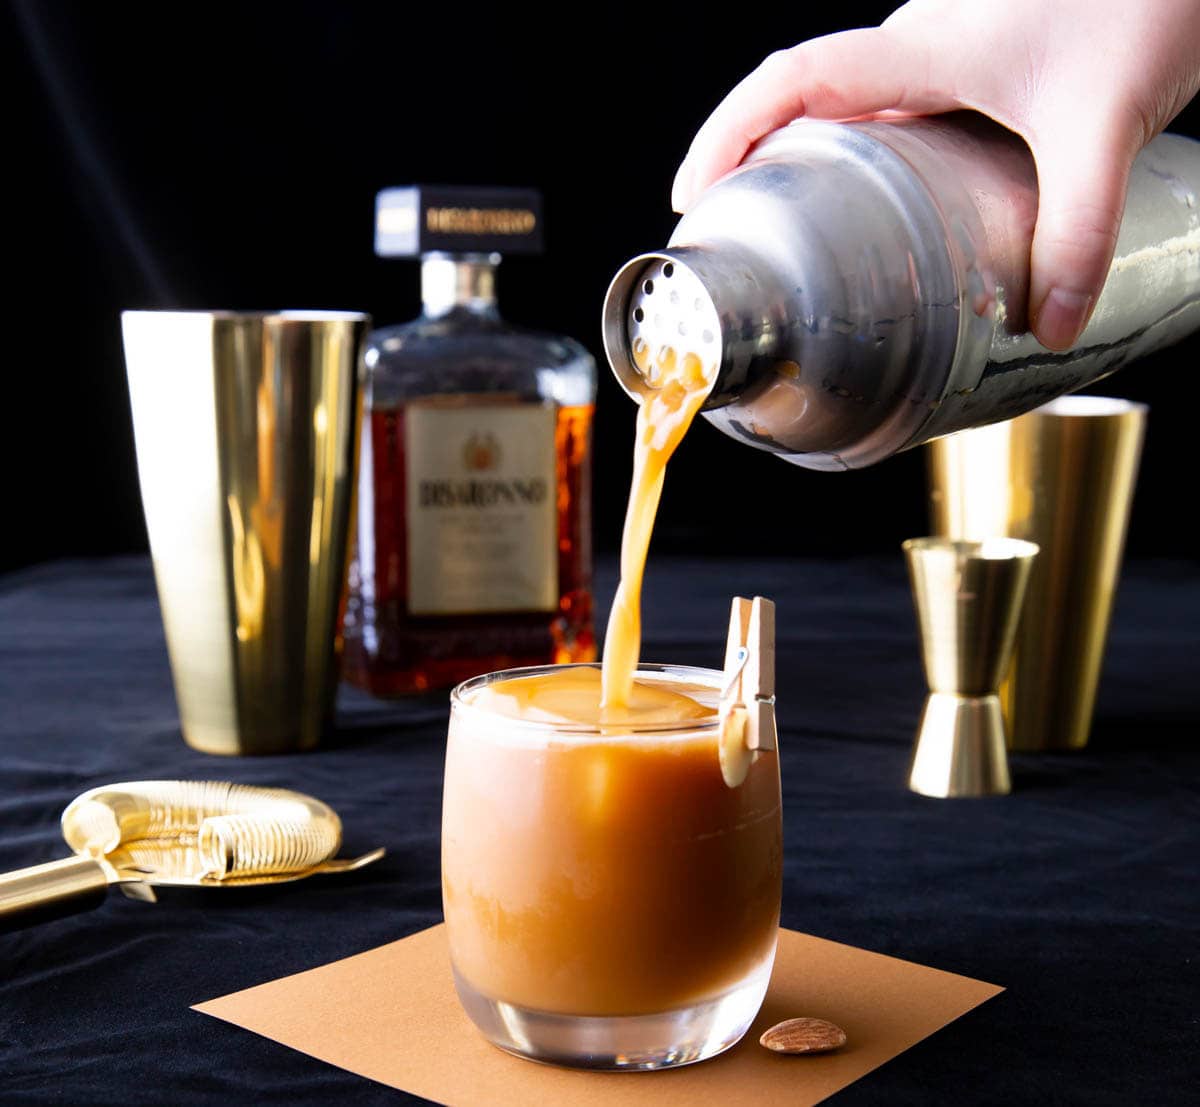 Preparing a Toasted Almond with Disaronno, a gold cocktail shaker, and cocktail tools